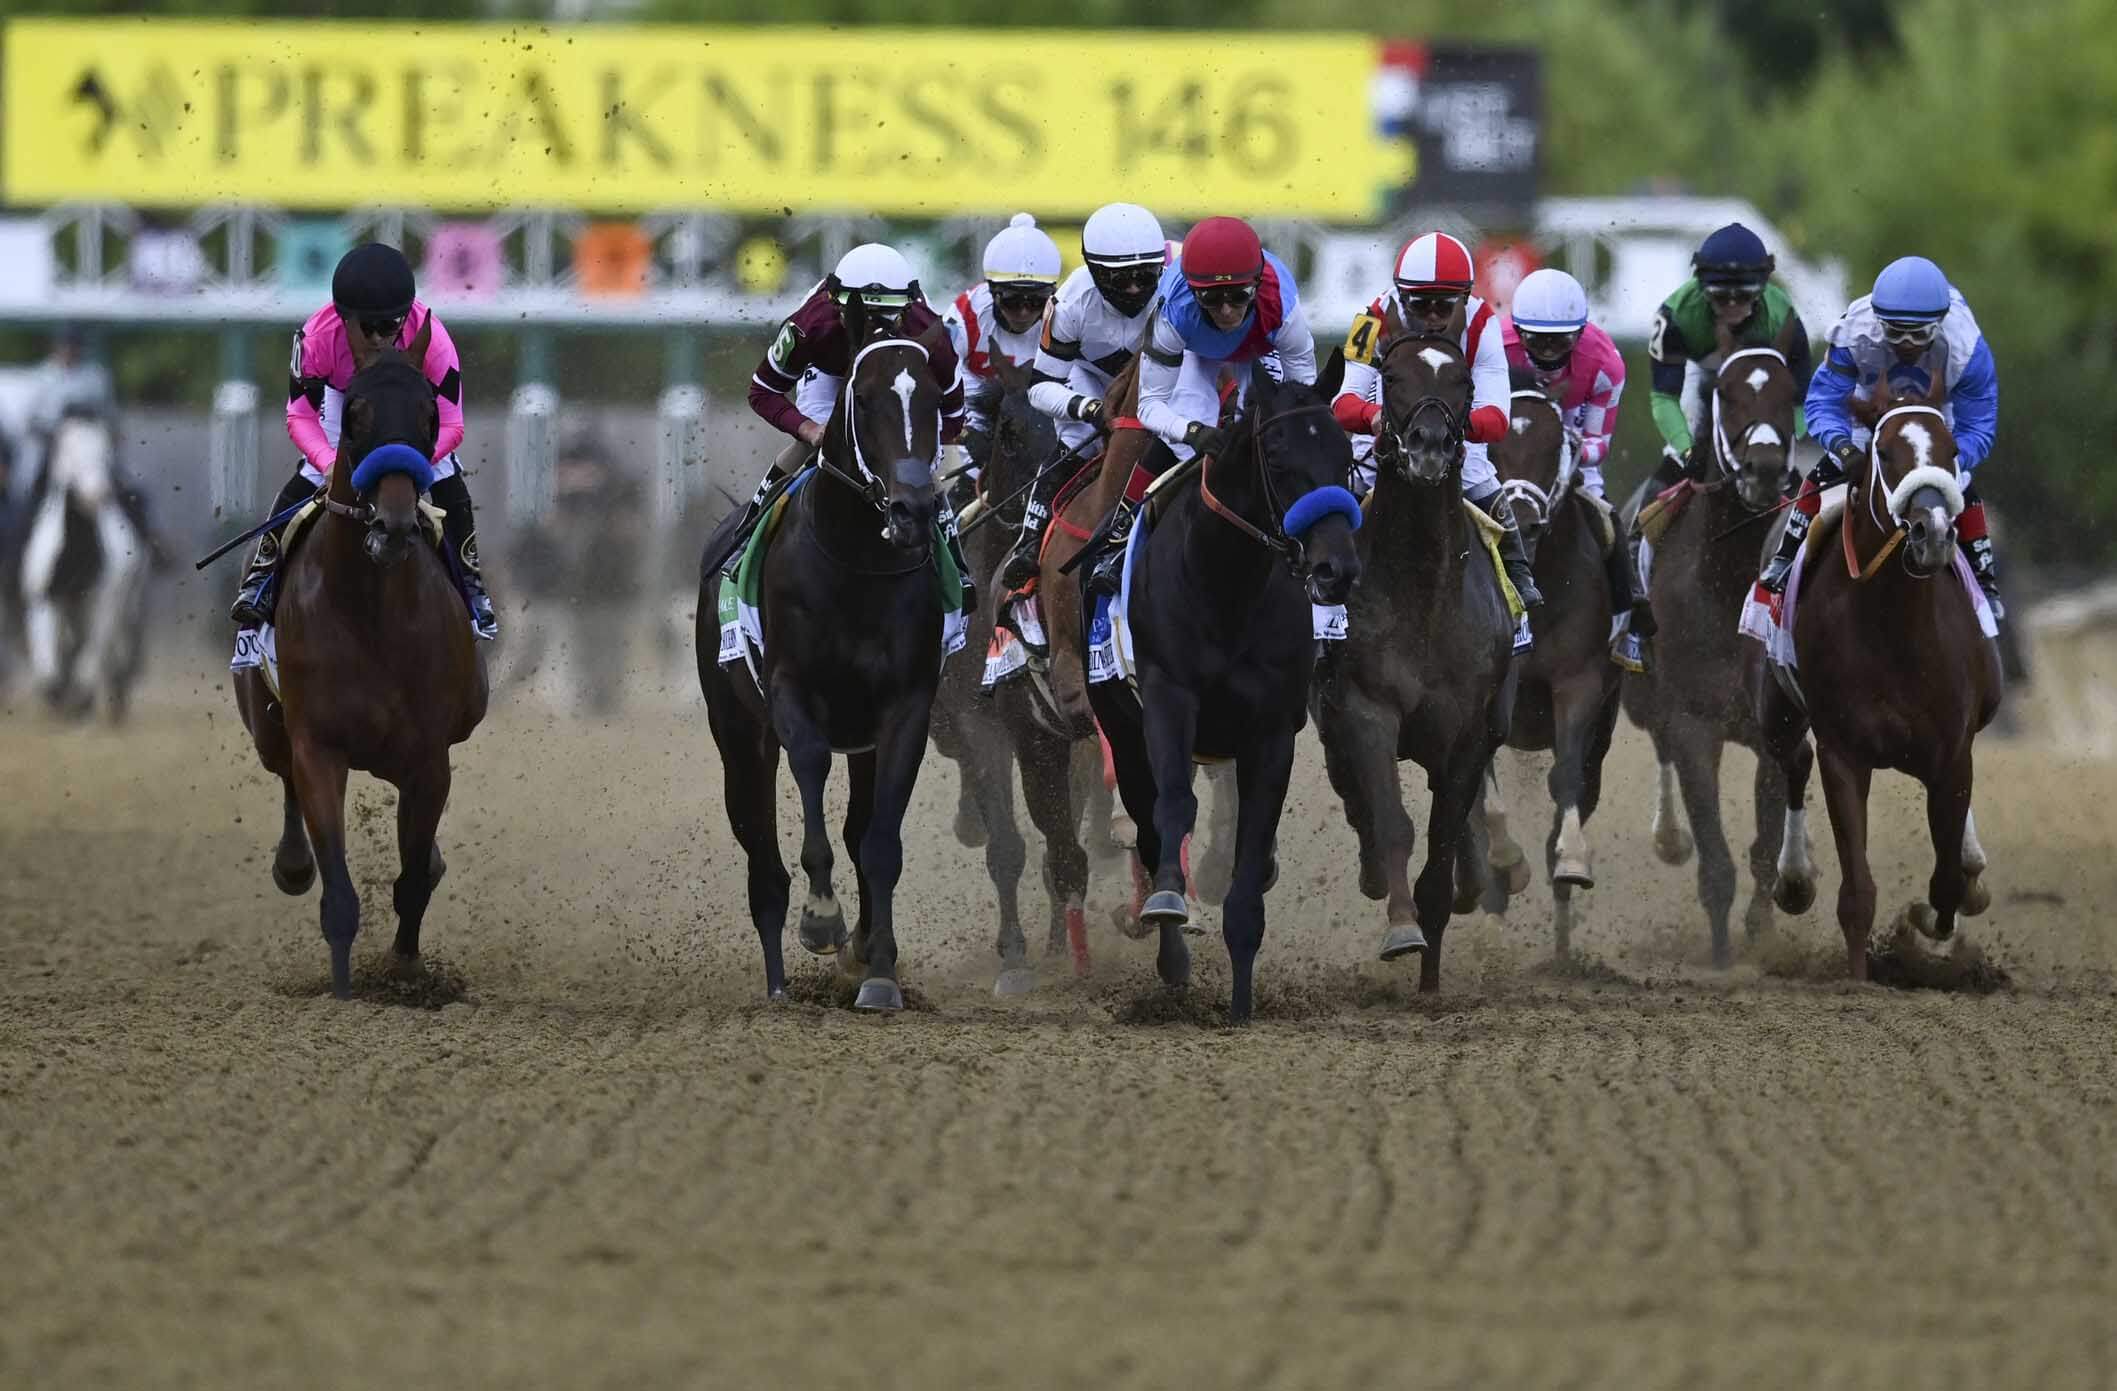 Horses break from the grate during the 146th running of the Preakness Stakes at Pimlico Race Course.